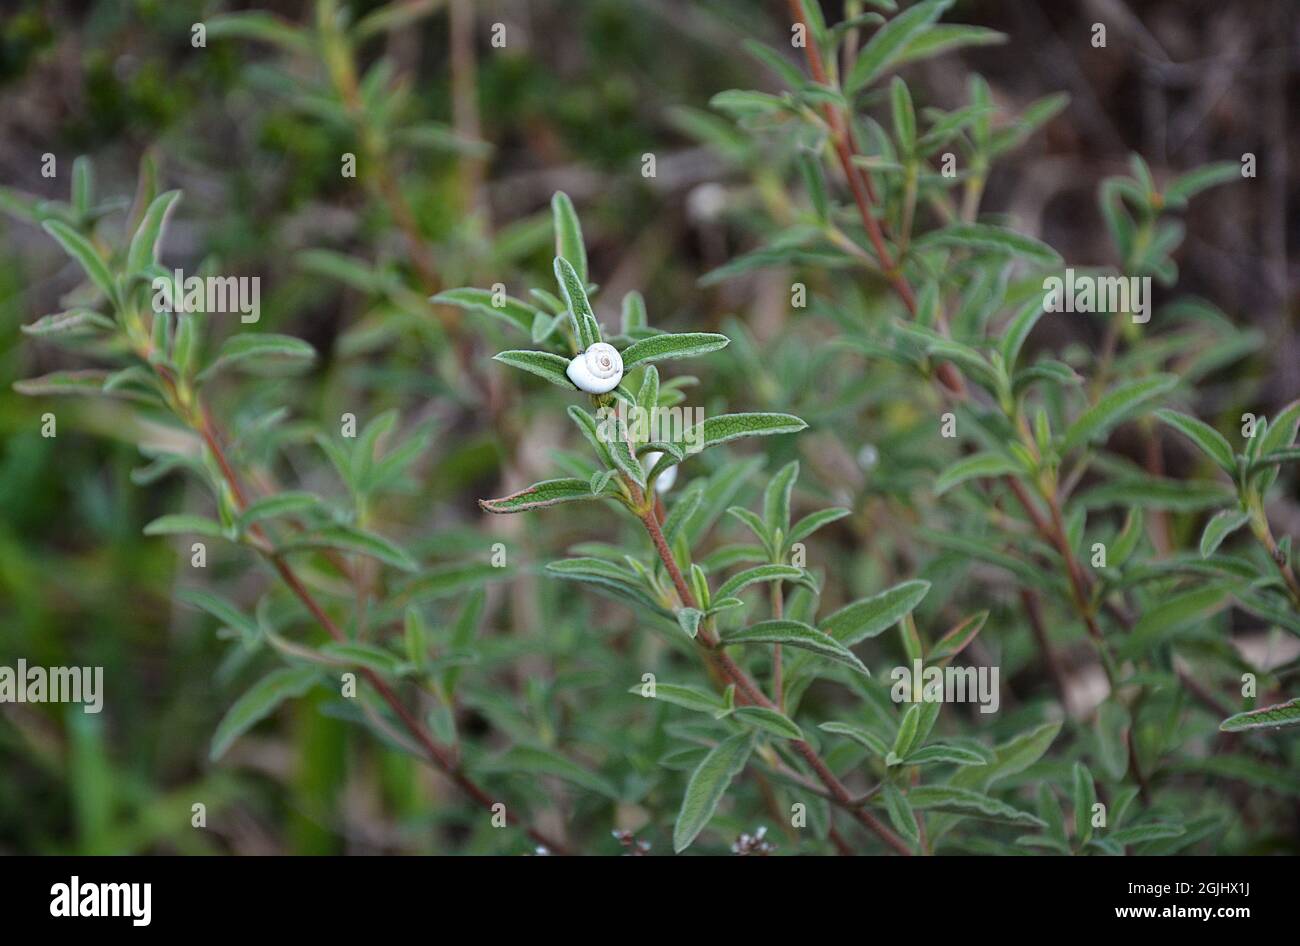 View of small snail nestled into a rosemary plant in a herbal garden in the South of France. Stock Photo